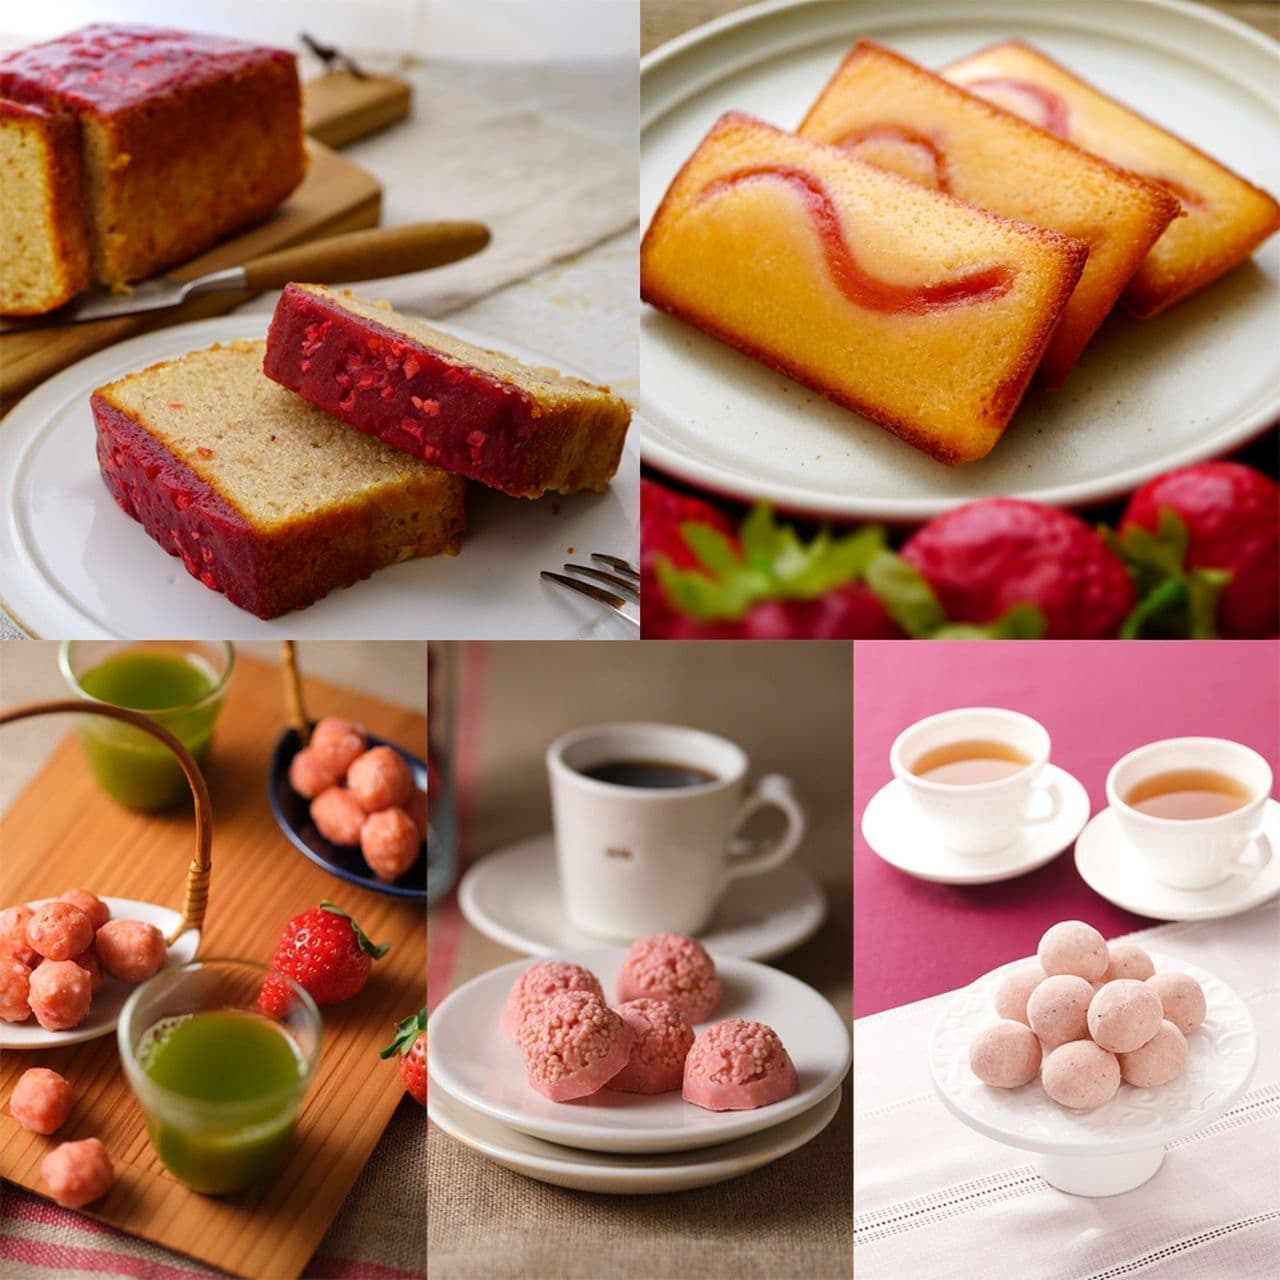 Seijo Ishii Recommendation! Assortment of 5 strawberry products